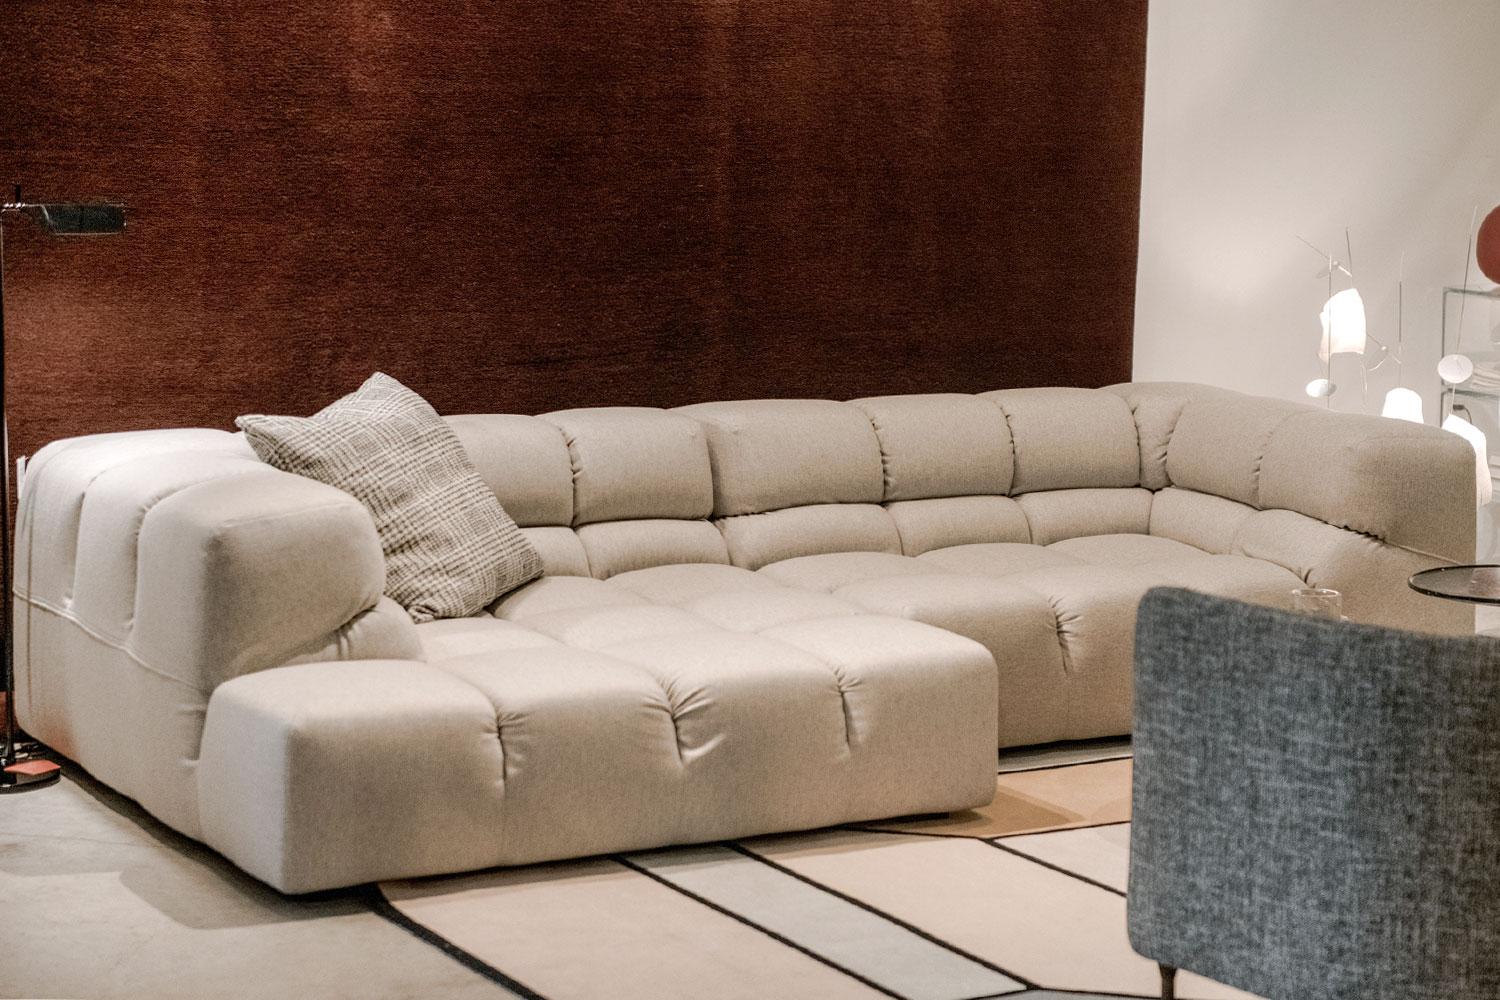 This Tufty-Time sectional is inspired by the creativity of Patricia Urquiola. Modular and adaptable, Tufty-Time's upholstered large squares and kick pleat, the covers create an undeniably contemporary look. Steel internal frame with black legs.